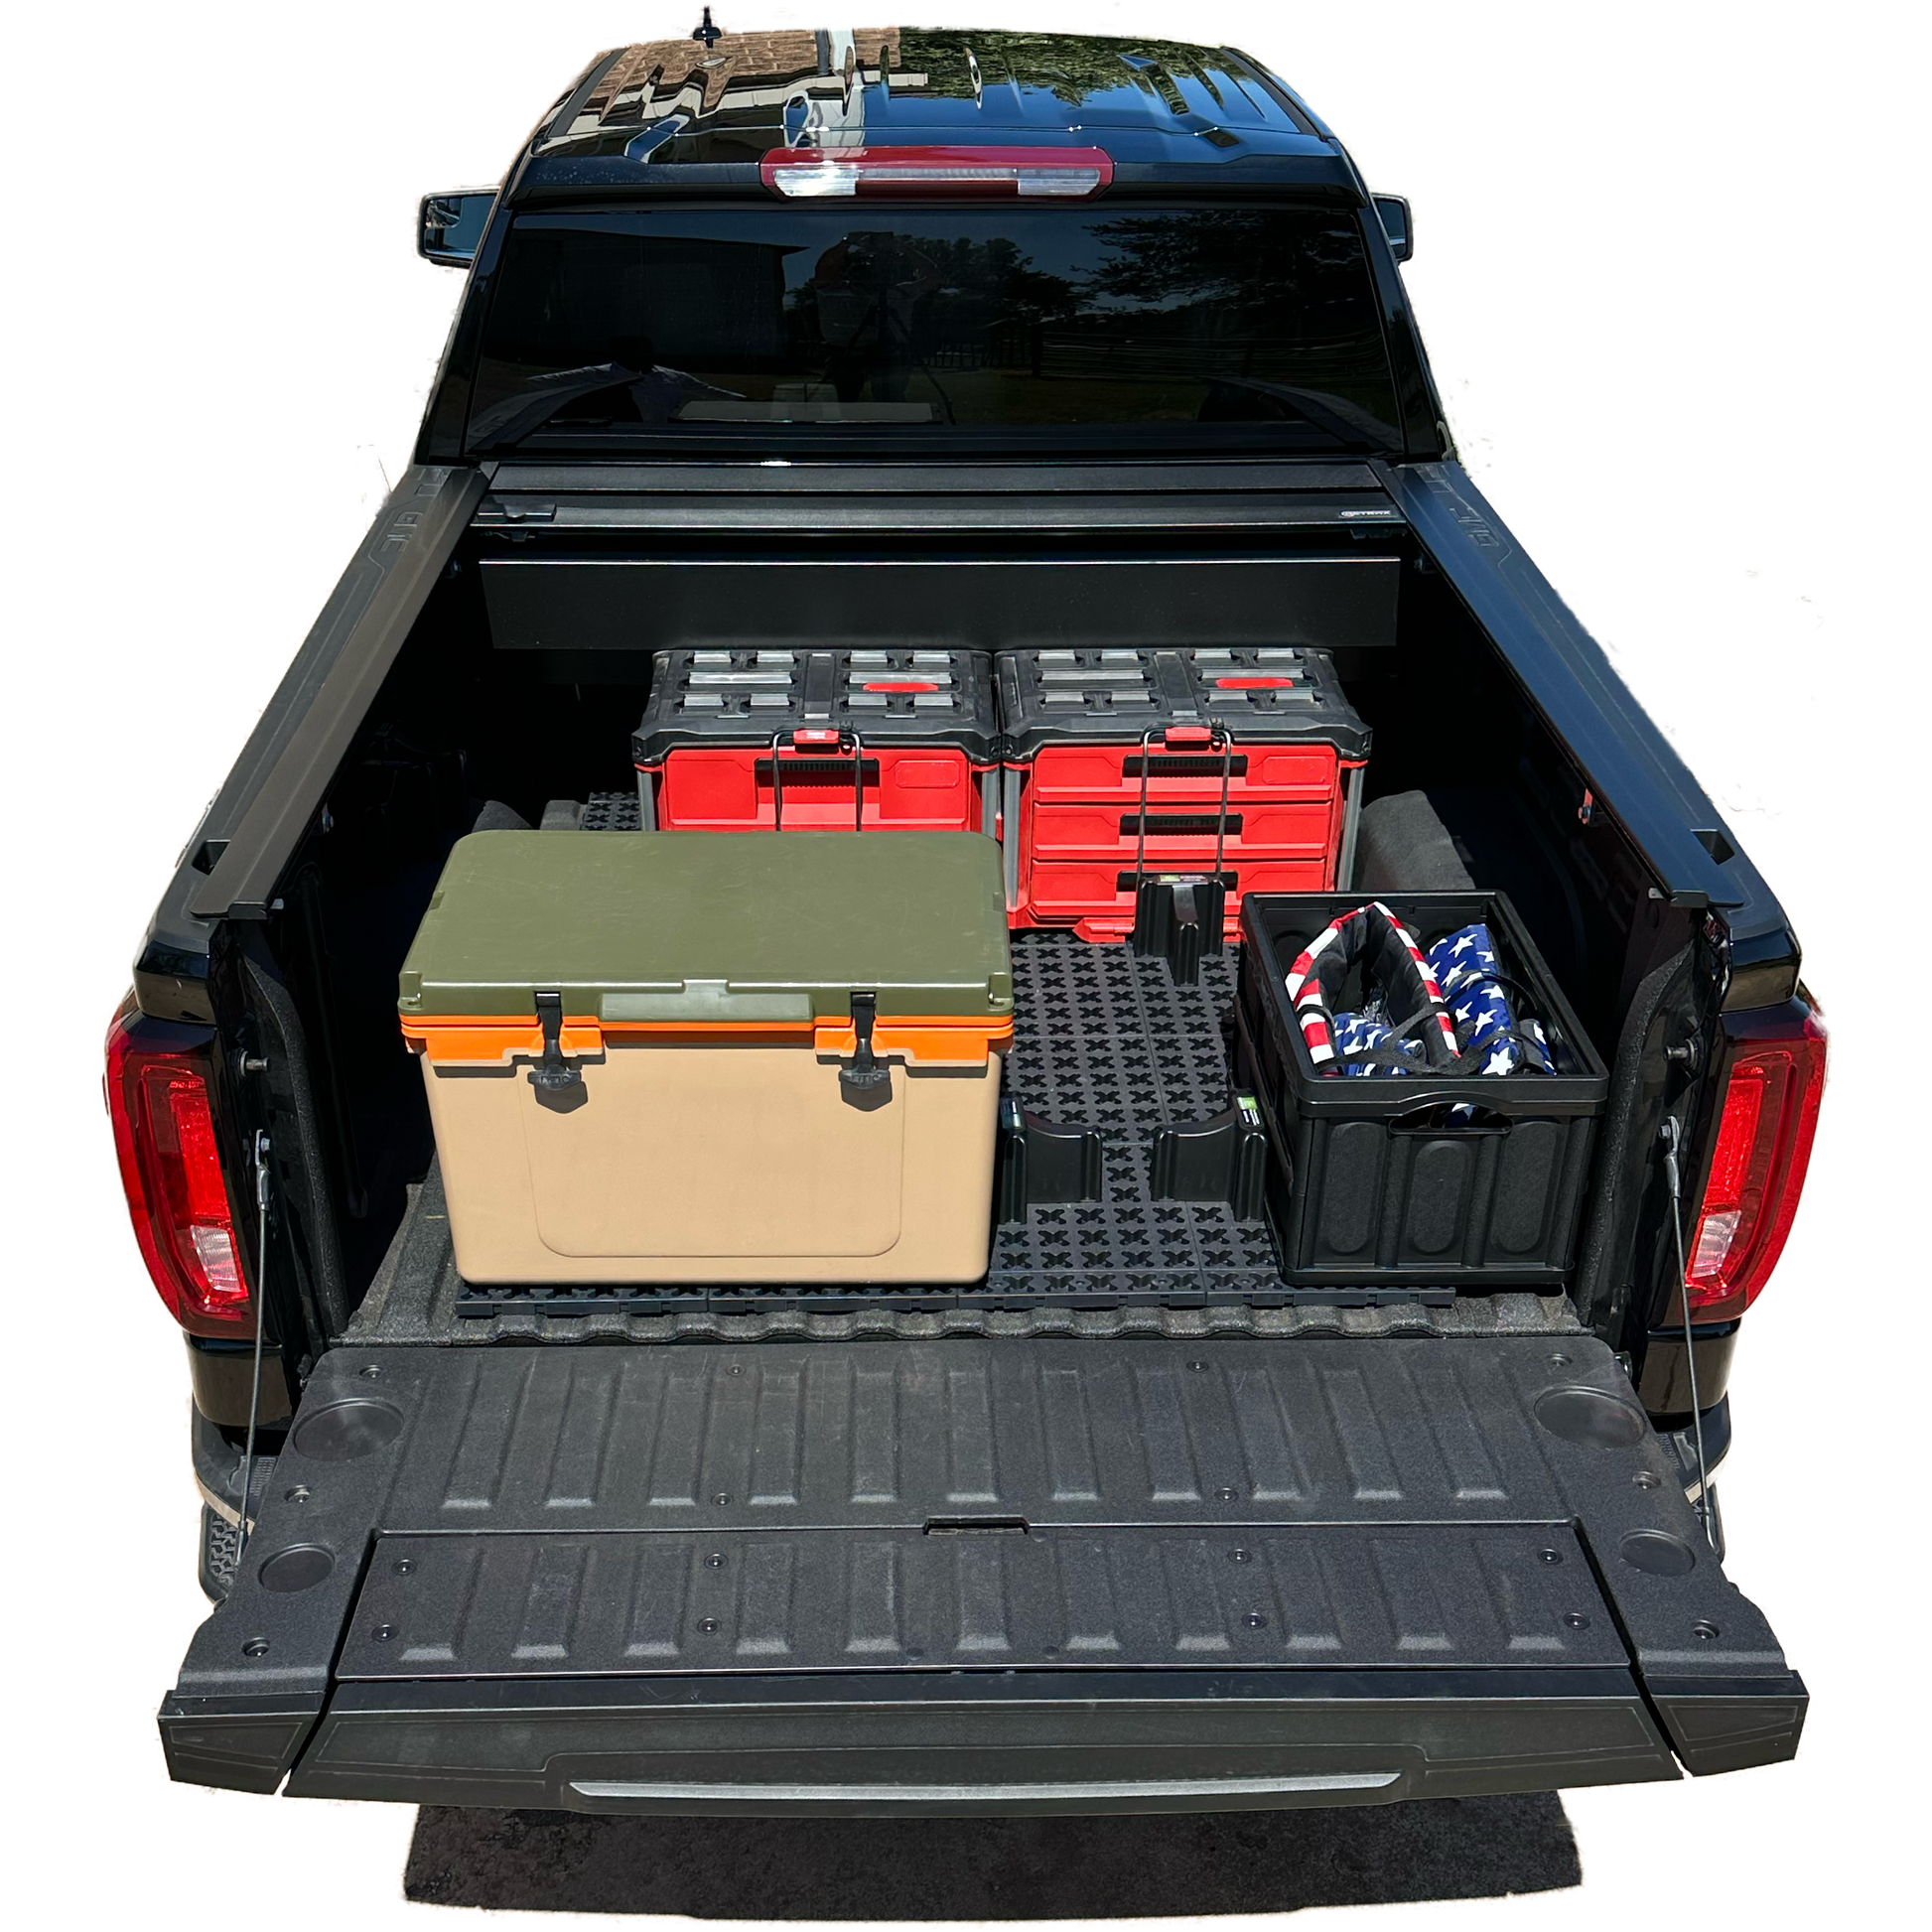 GMC short bed truck with Tmat securing red tool boxes and a brown cooler